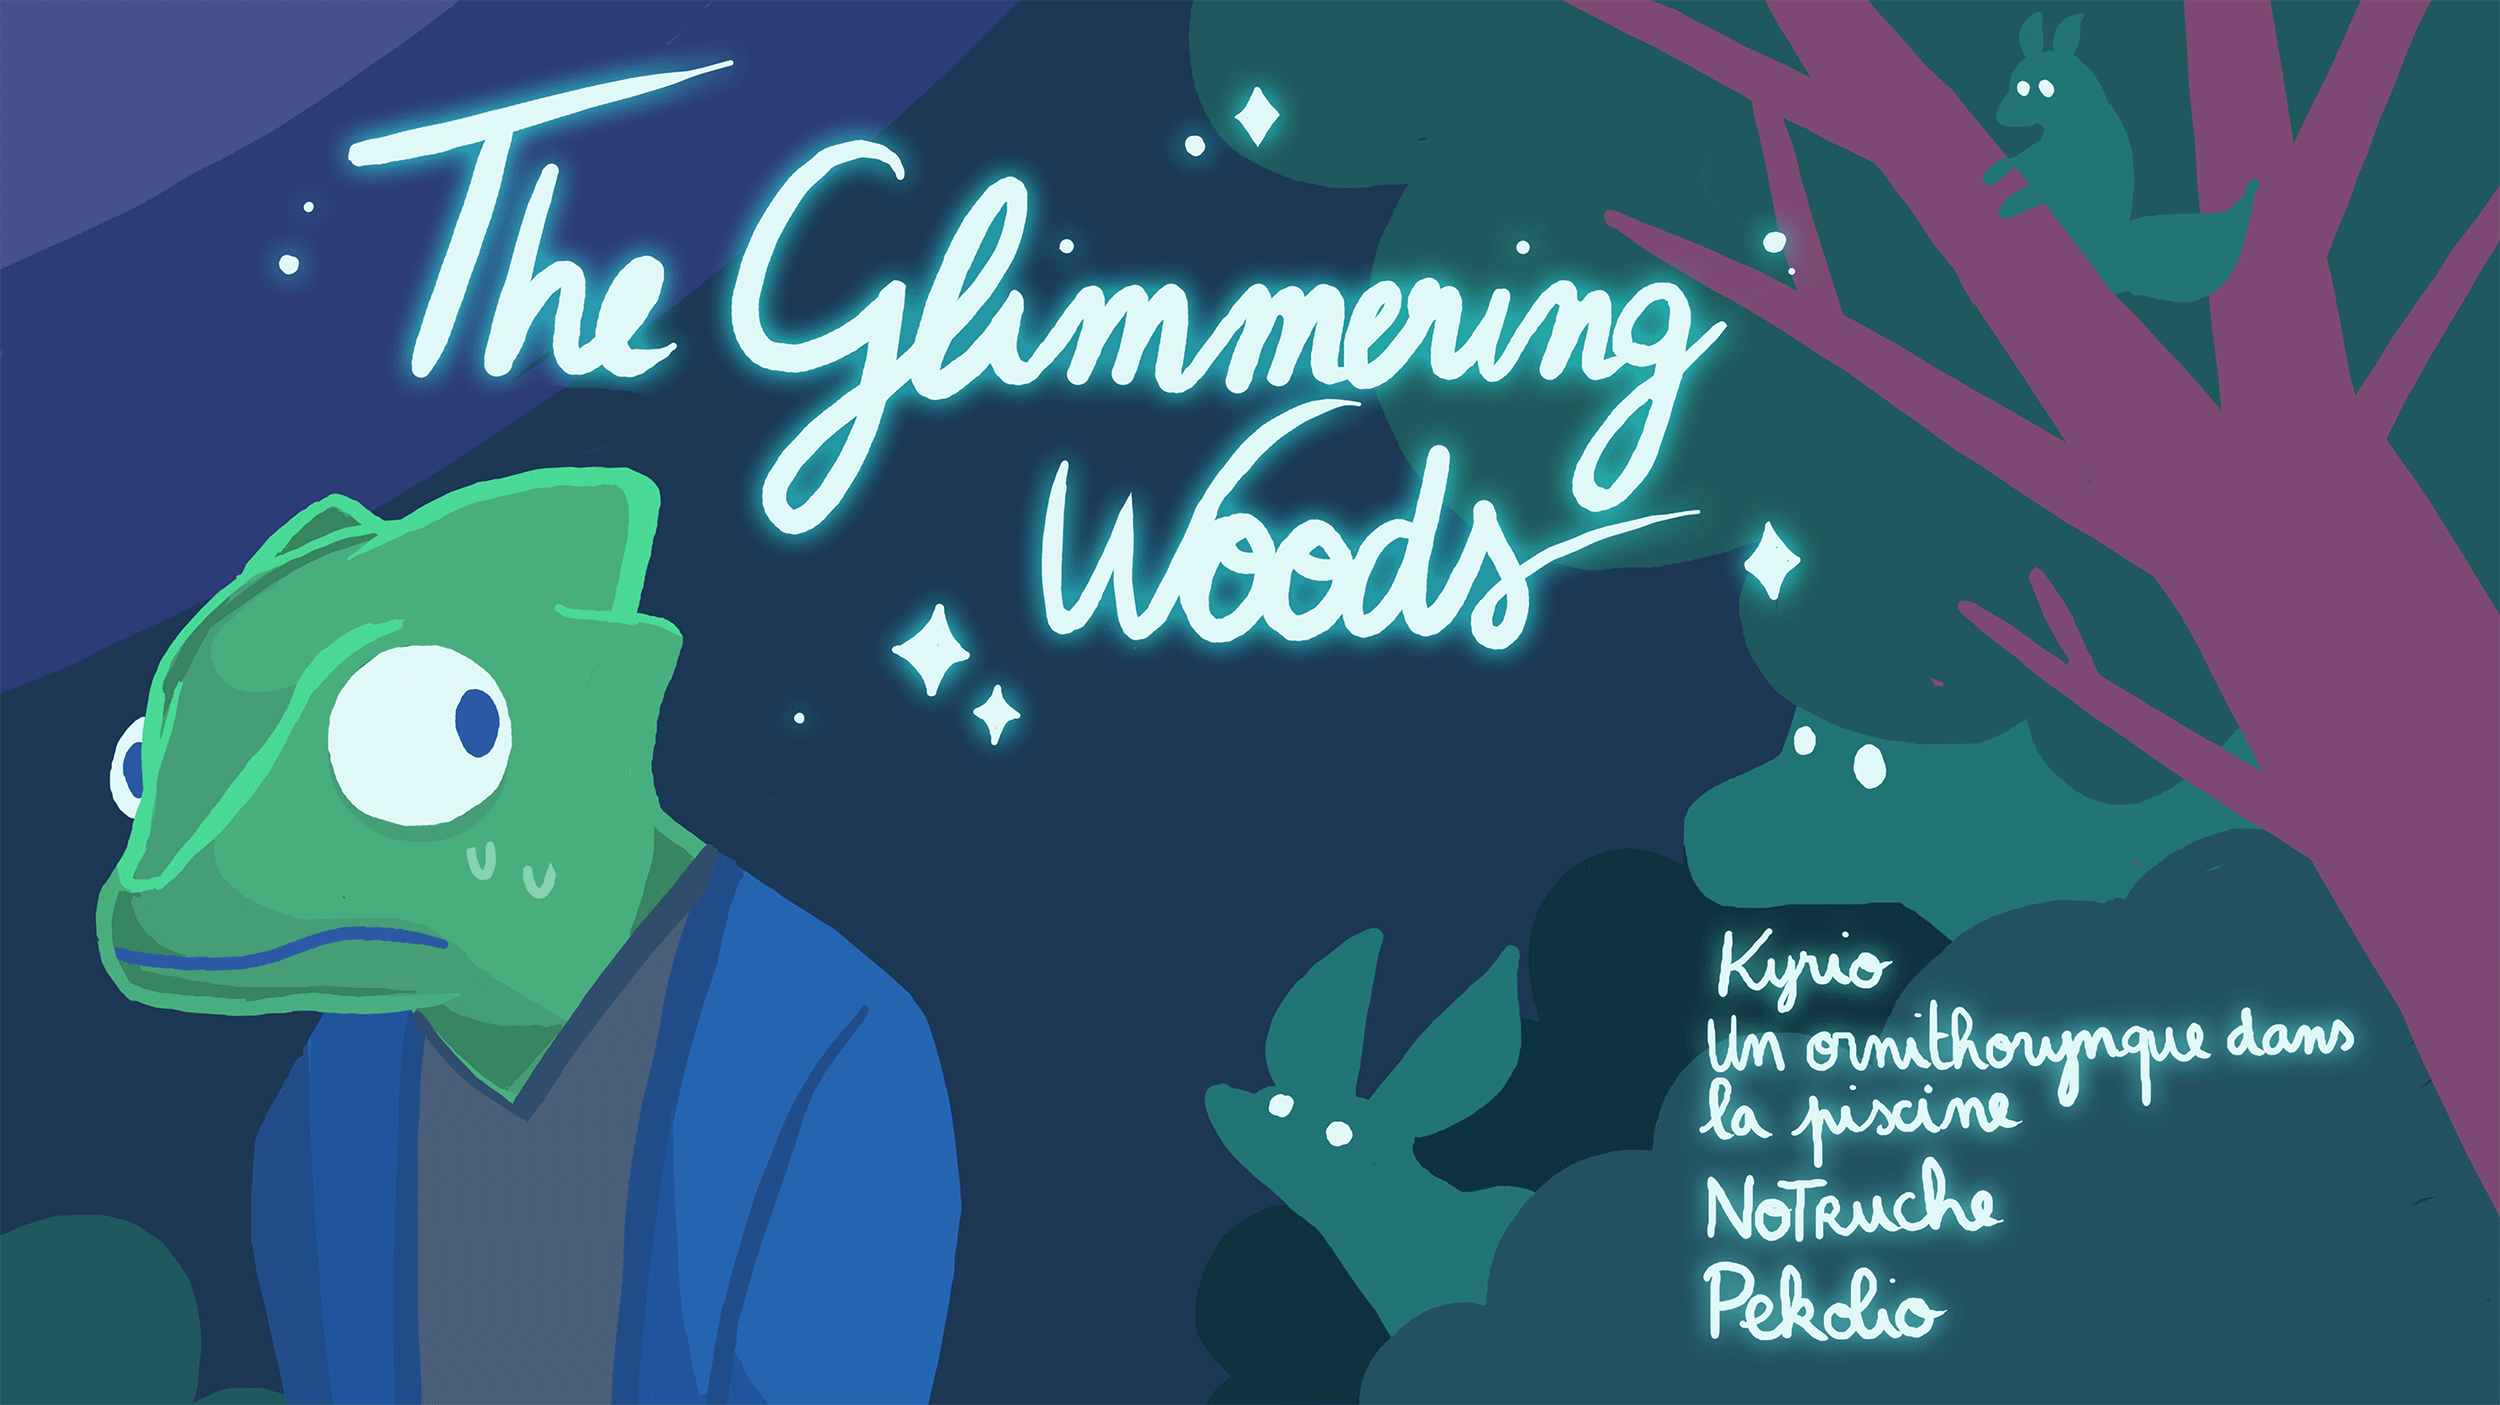 The Glimmering Woods